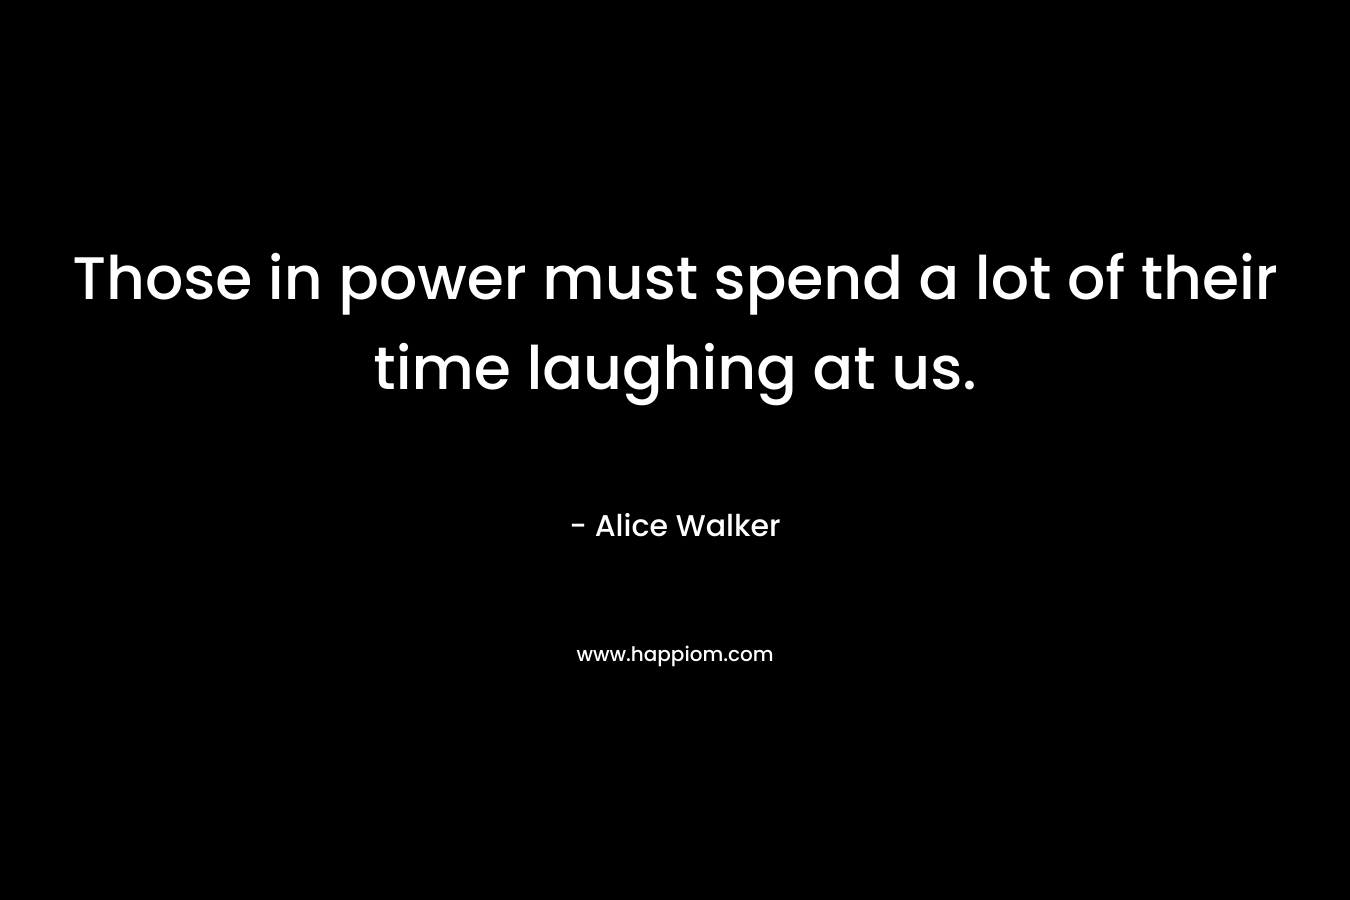 Those in power must spend a lot of their time laughing at us. – Alice Walker